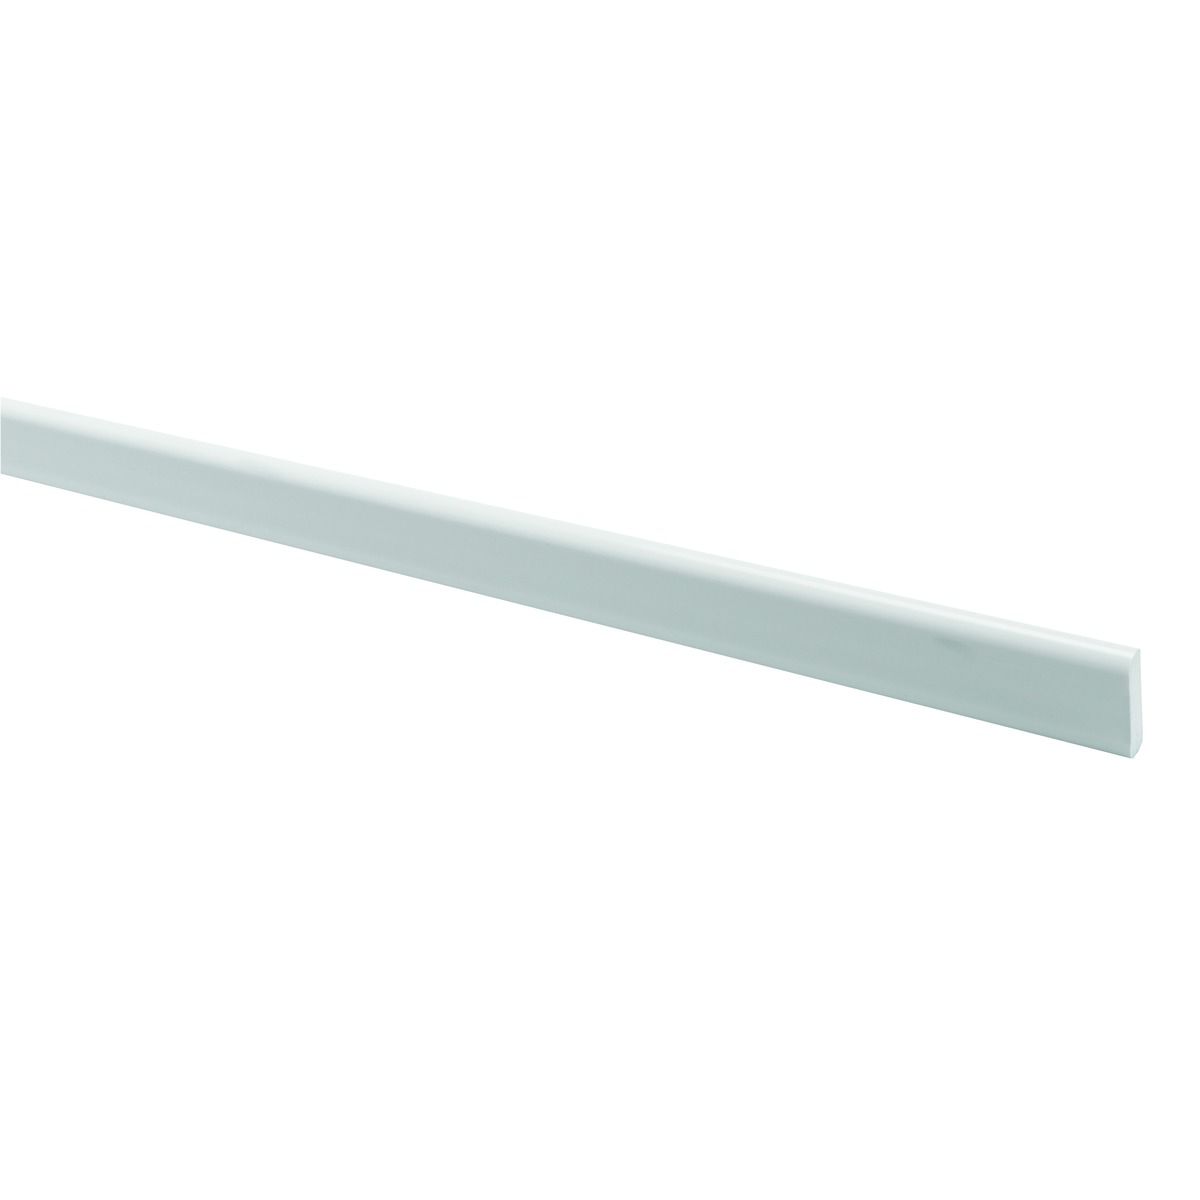 Image of Wickes PVCu White Window Cloaking Trim - 95 x 2500mm - Pack of 5